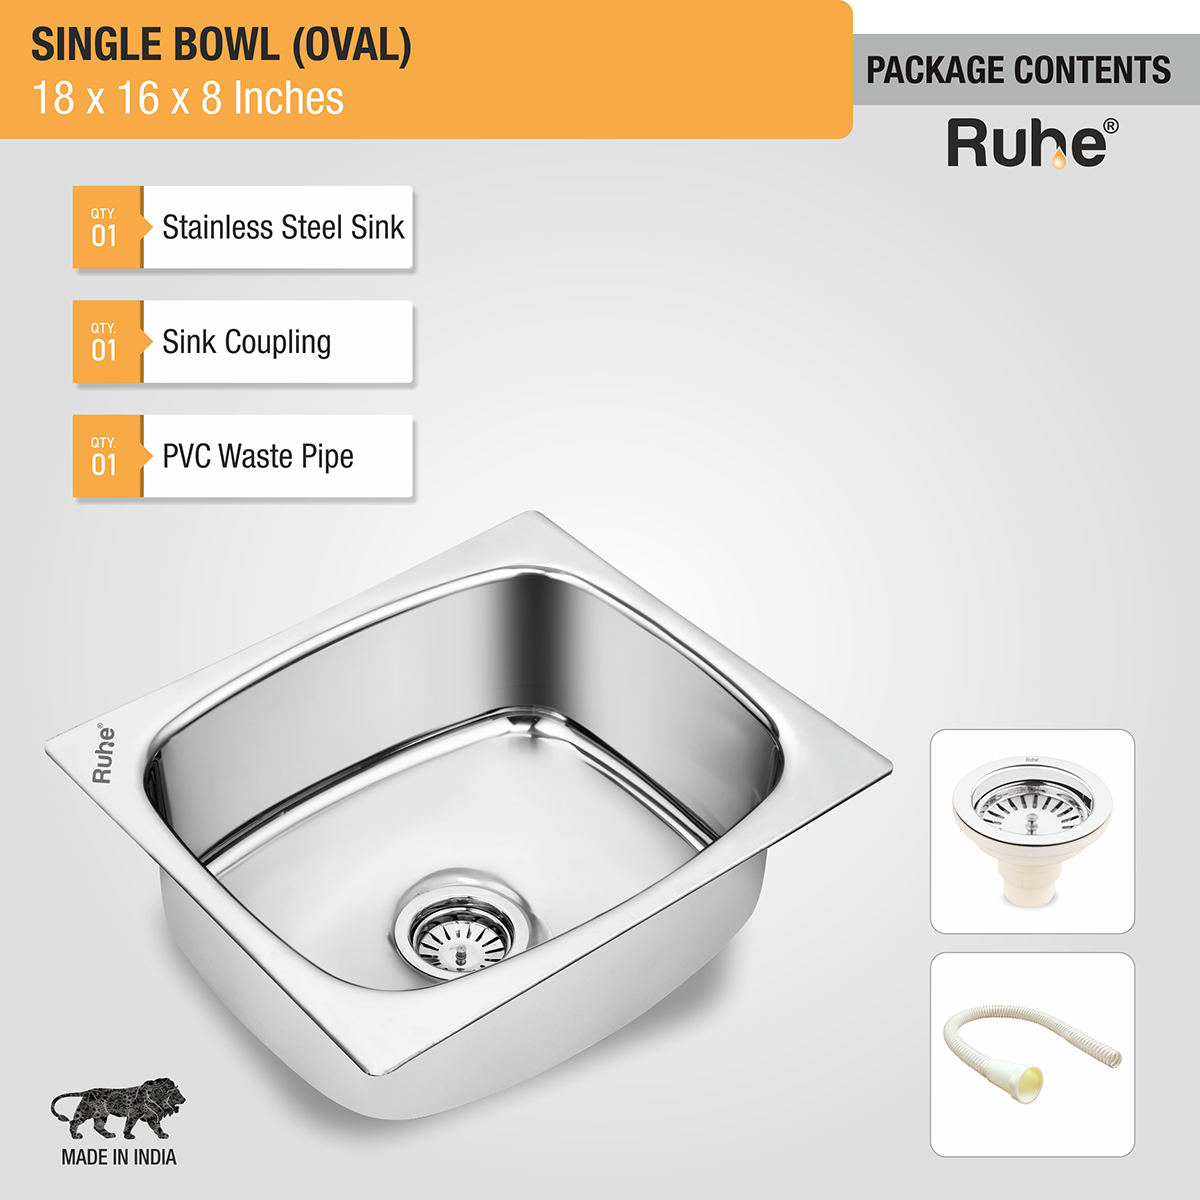 Oval Single Bowl (16 x 18 x 8 inches) Kitchen Sink package